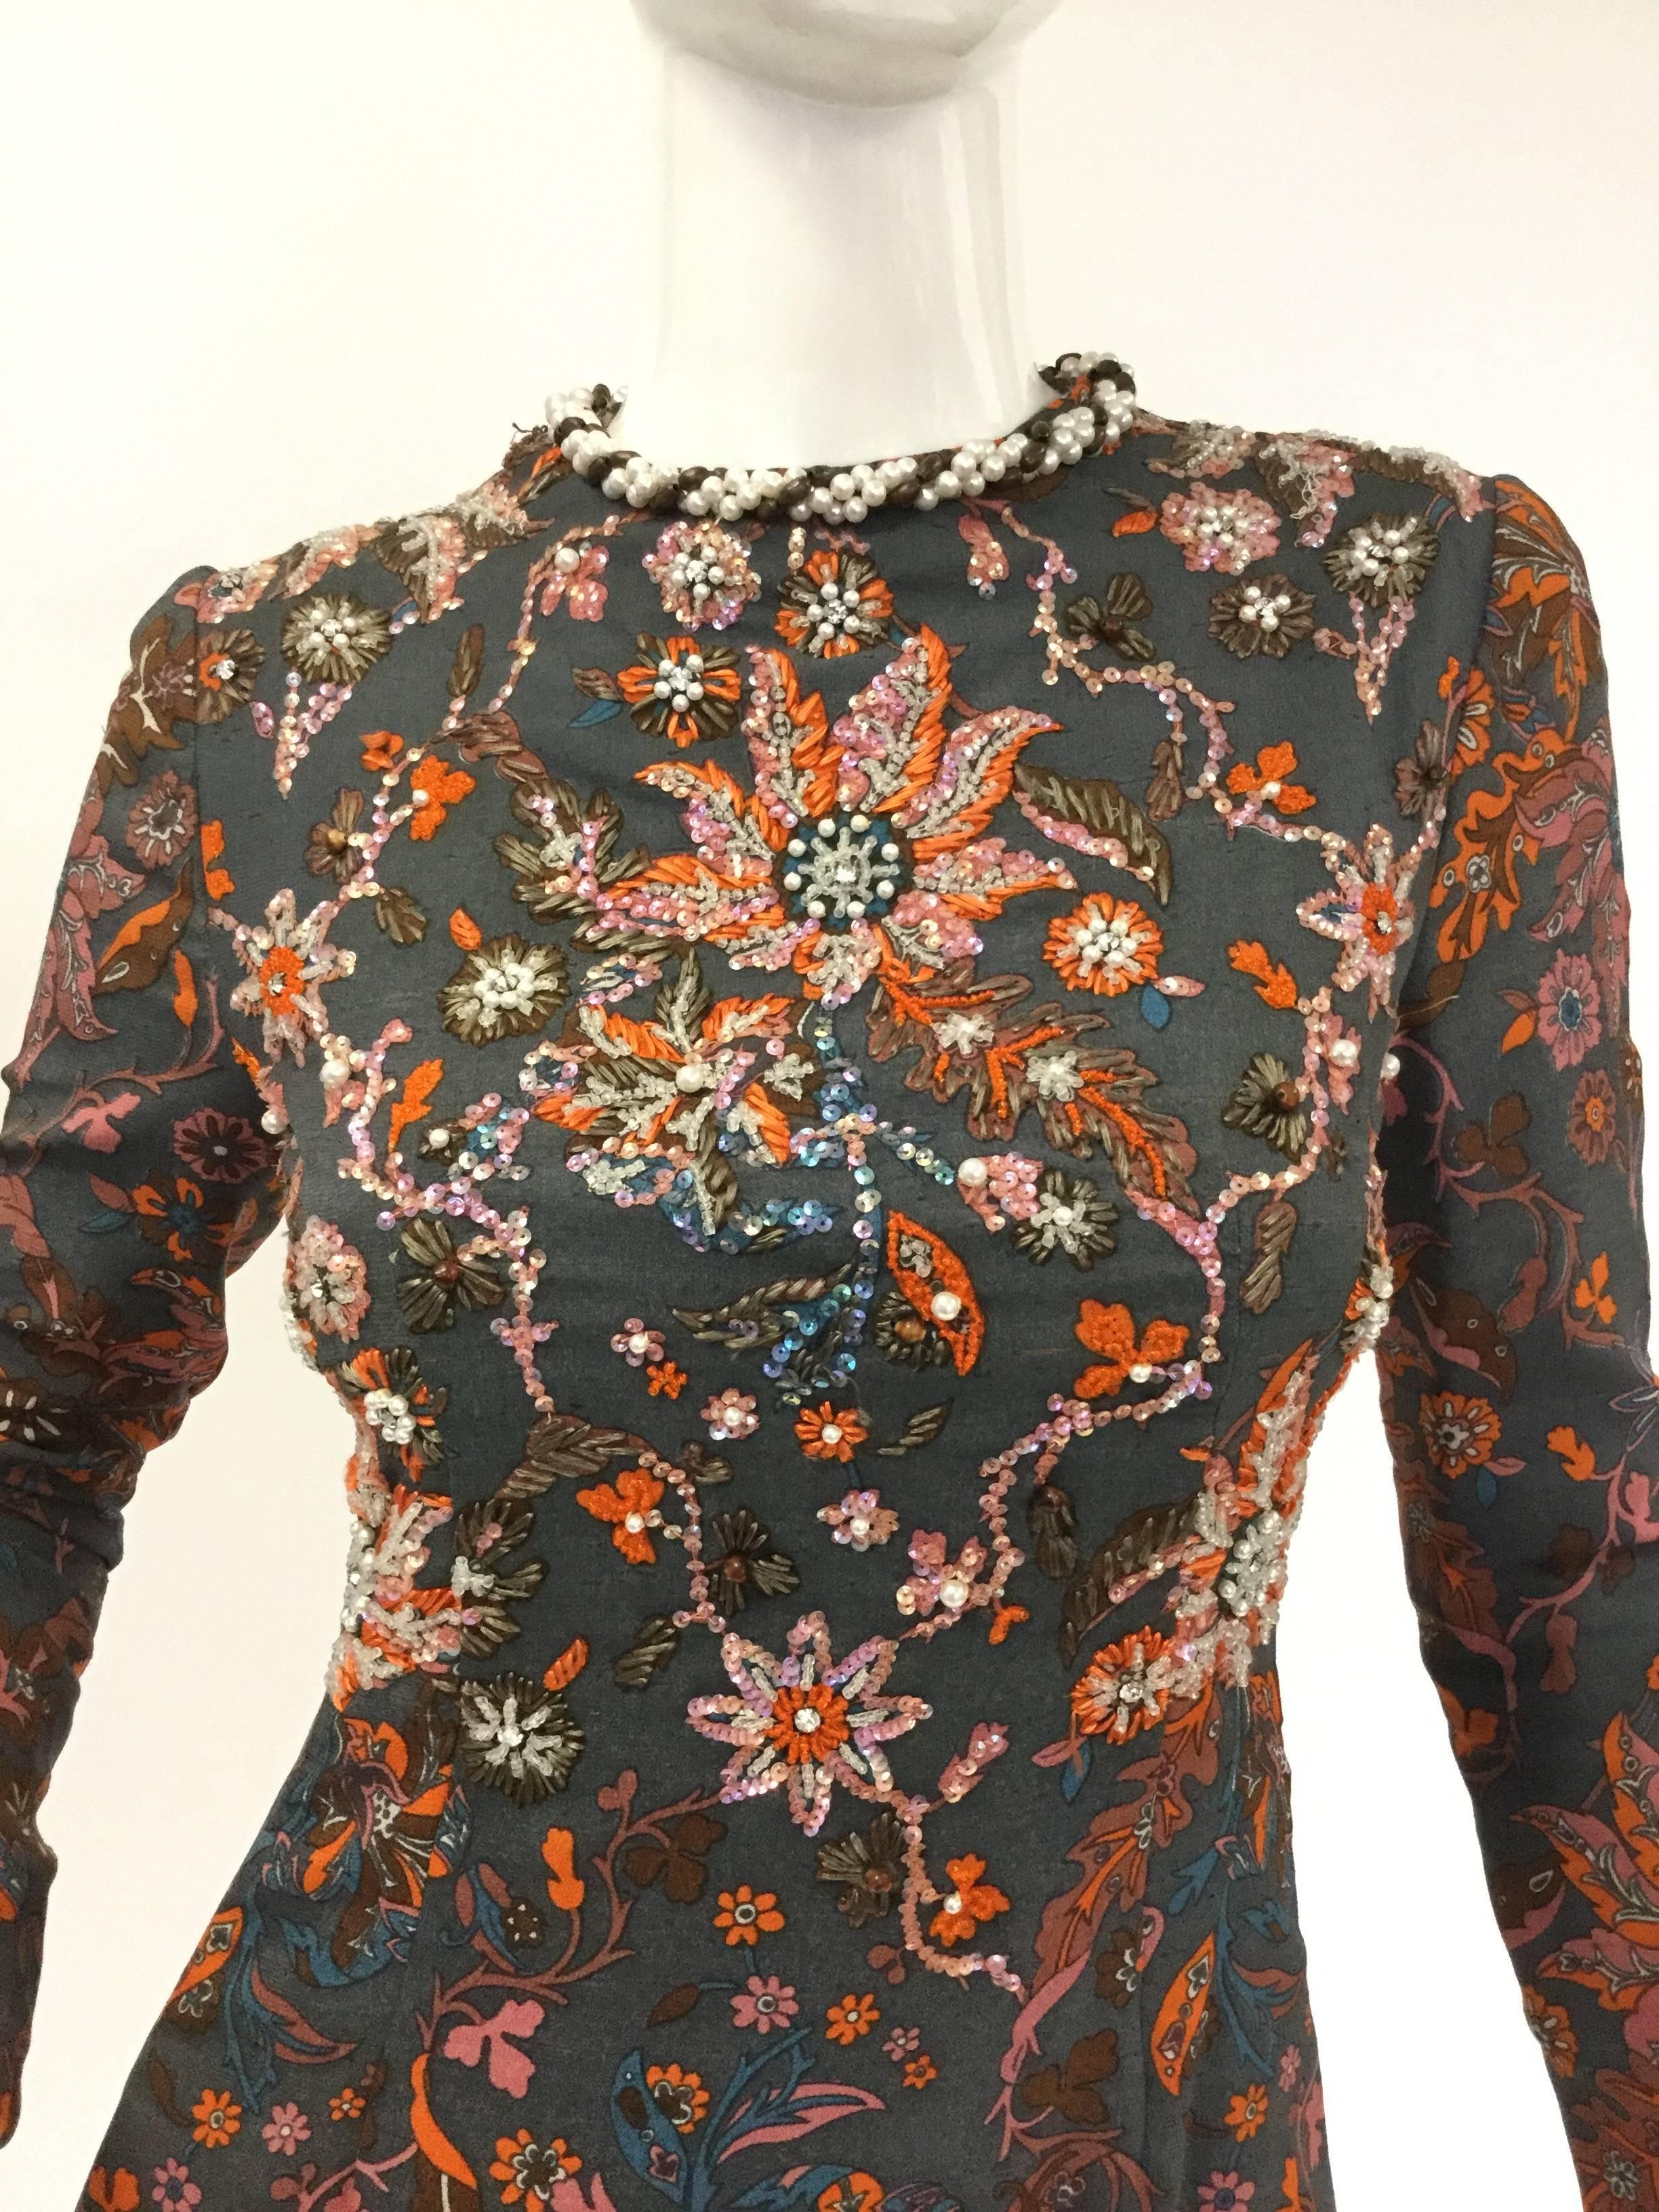 
This gorgeous beaded and sequined dress by George Halley is straight out of a fairy tale! The deep cyan background of the dress is host to a gorgeous potpourri of floral swirls and vines. The orange, pink, yellow, blue, and olive green flowers are